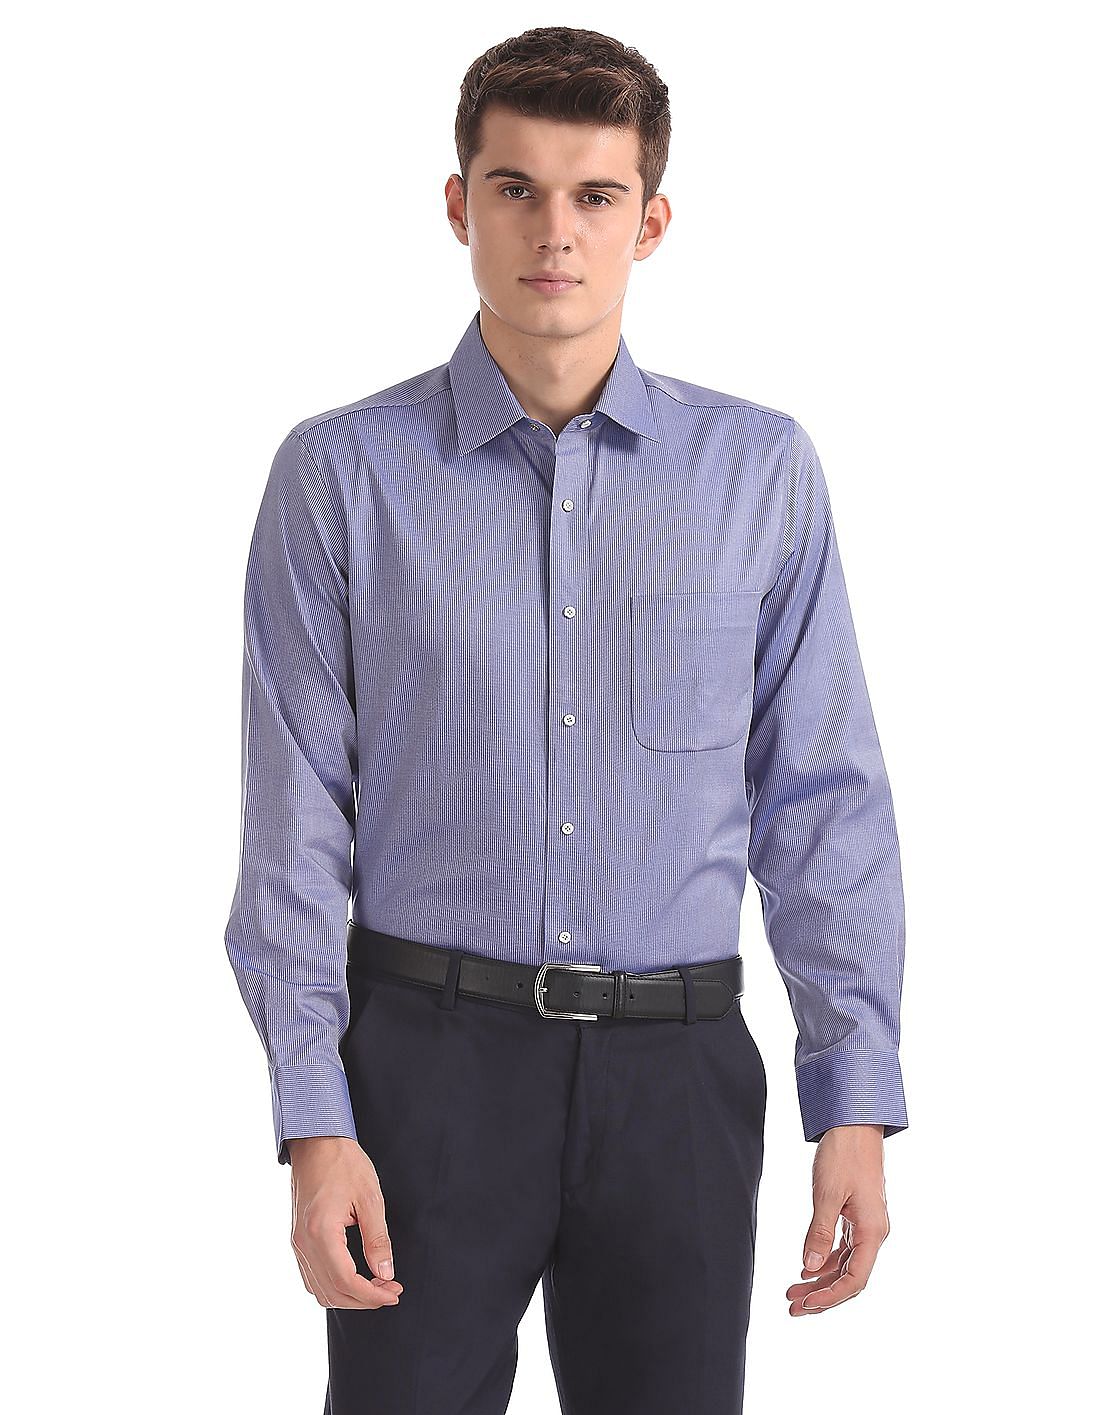 Buy Men Stitchless Patterned Shirt online at NNNOW.com